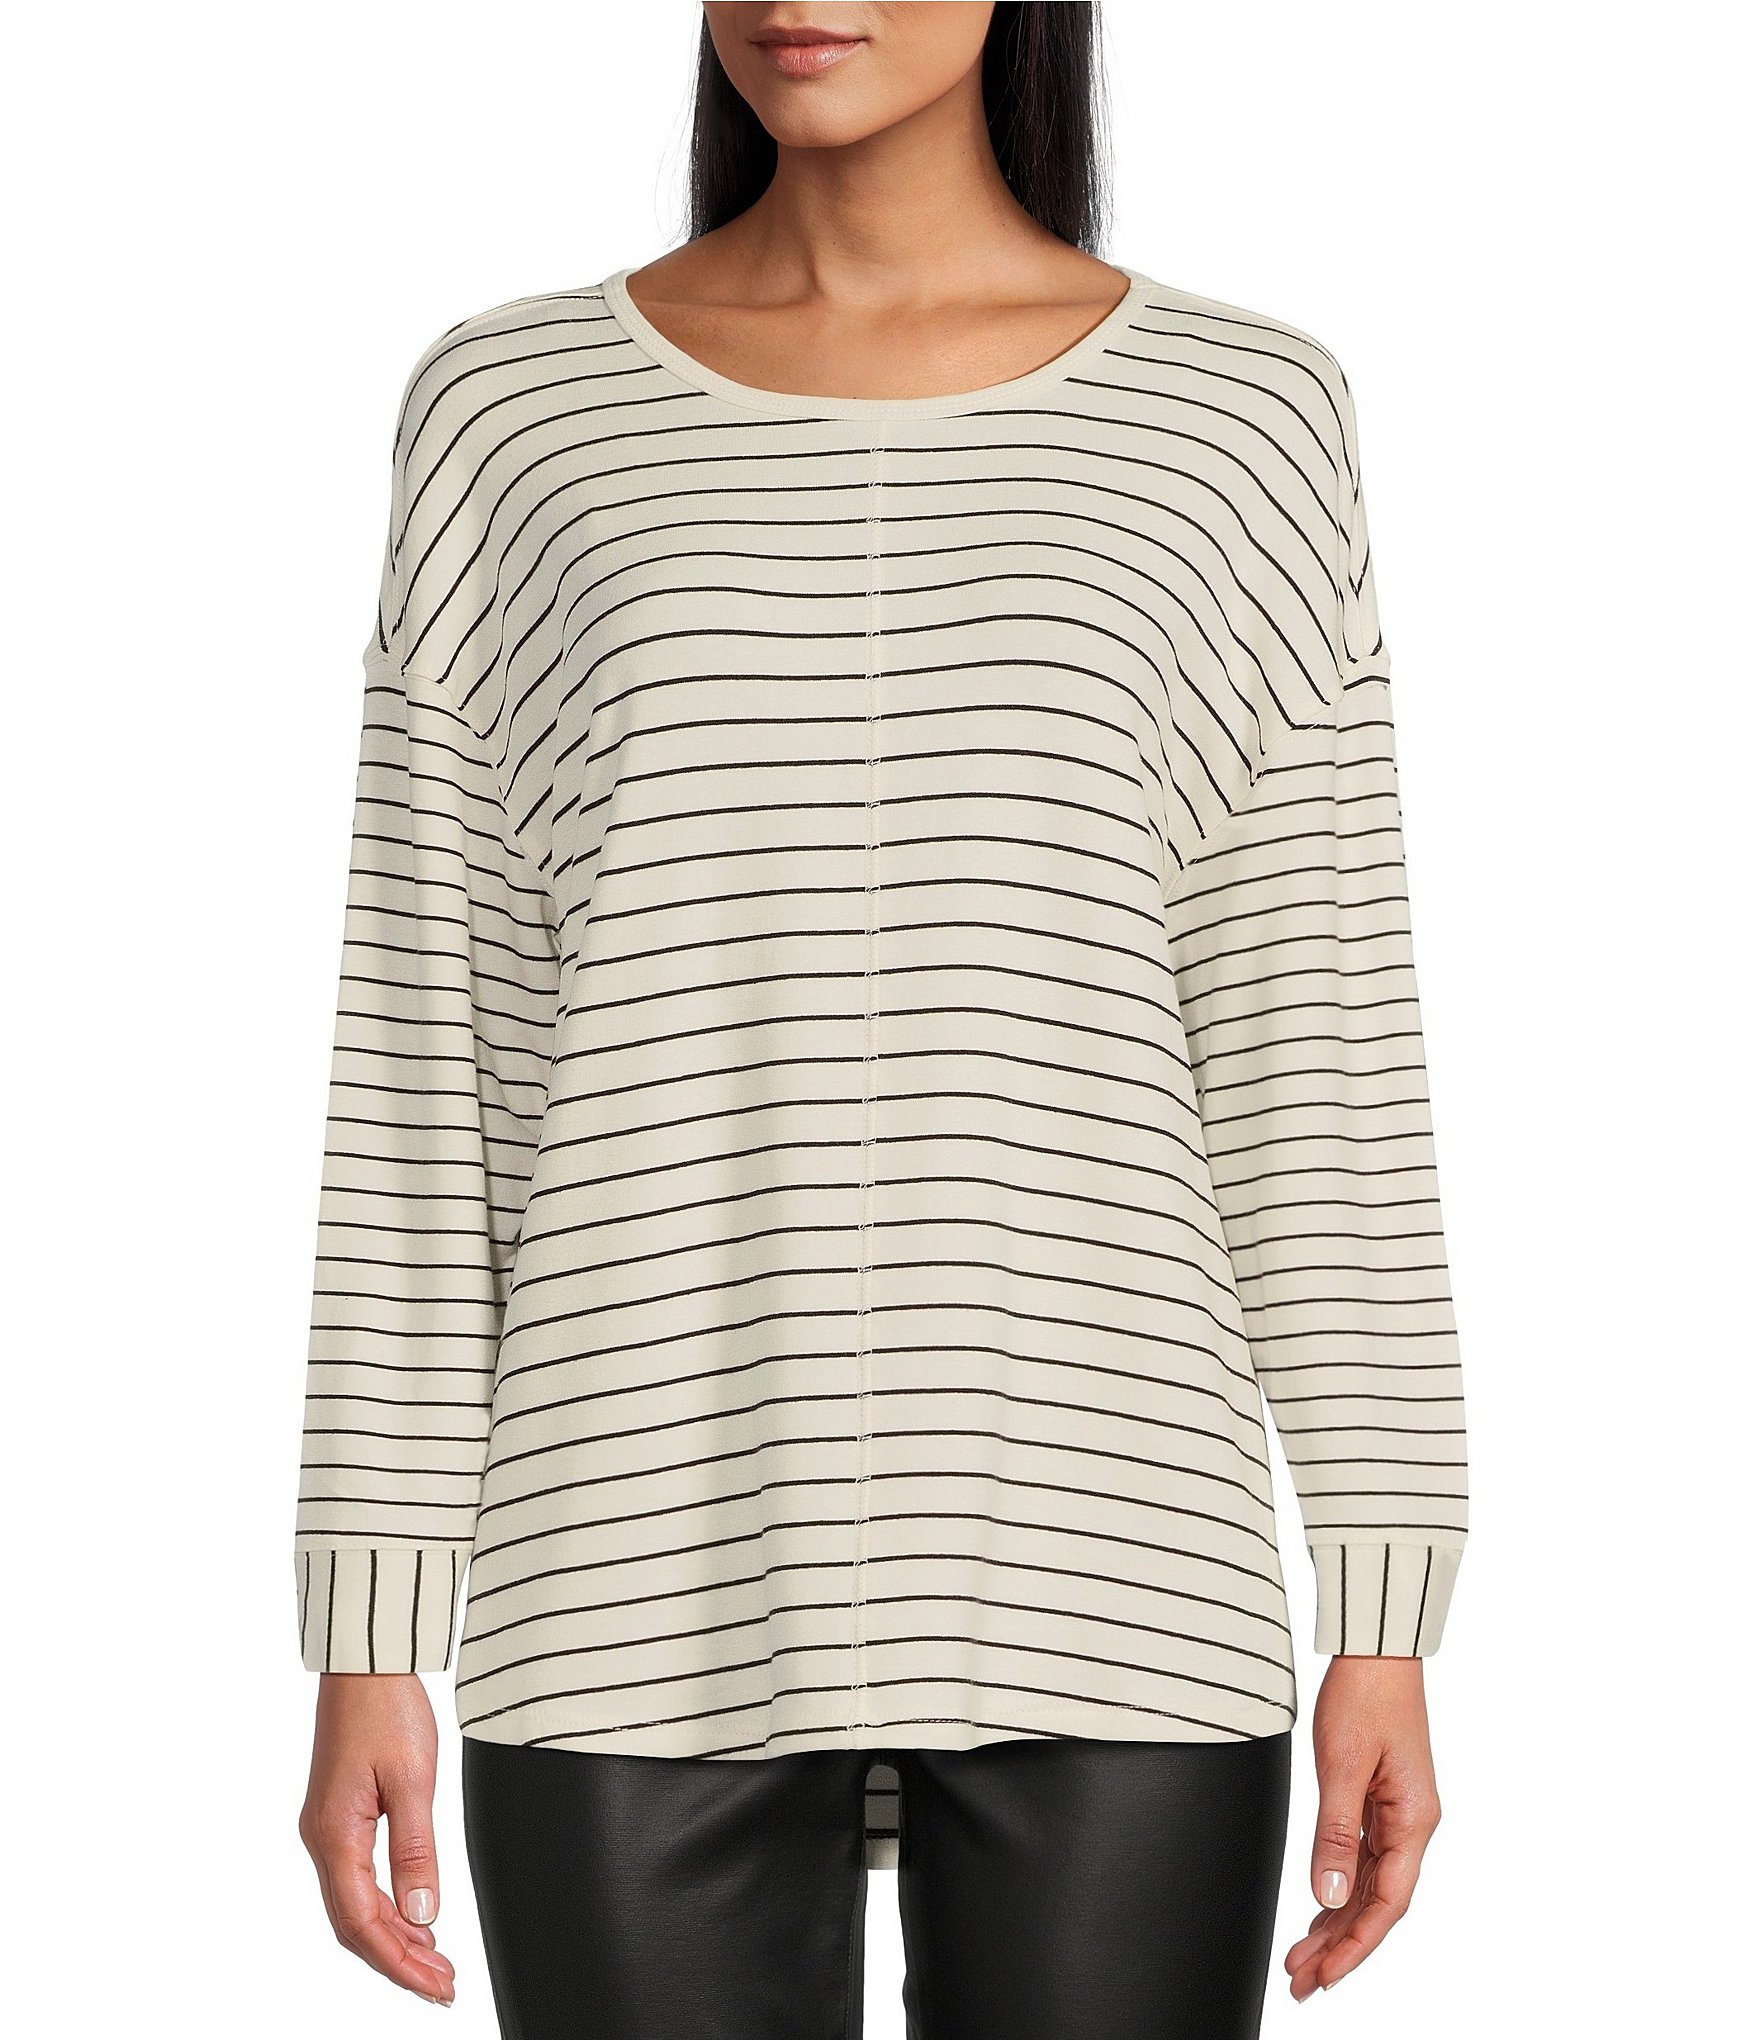 Westbound Classic Stripe Print Round Neck Long Sleeve Knit Tee Shirt ...